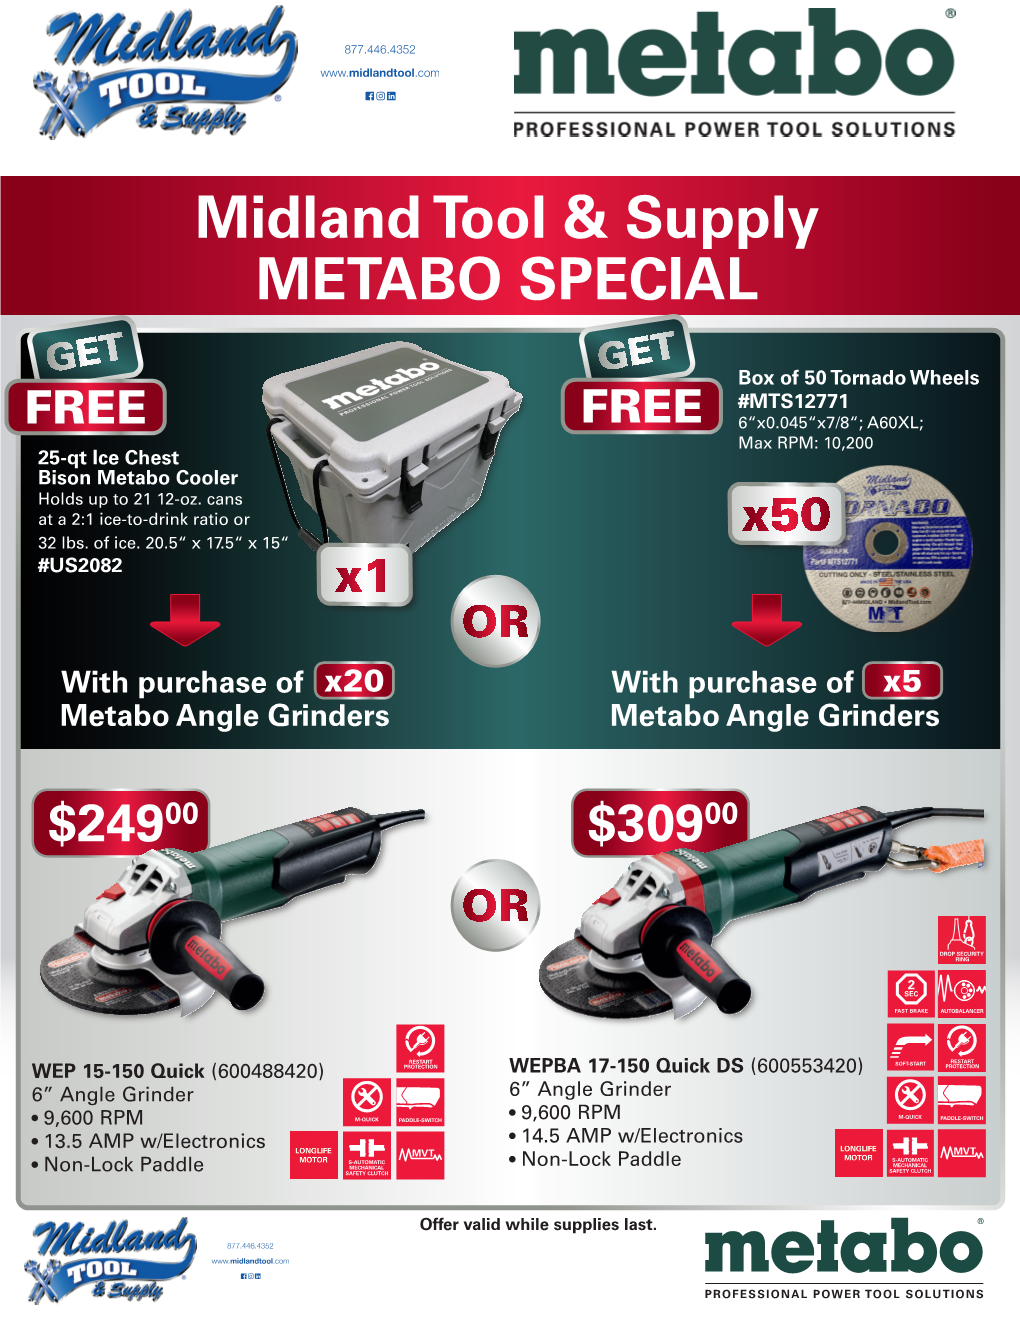 Midland Tool & Supply METABO SPECIAL